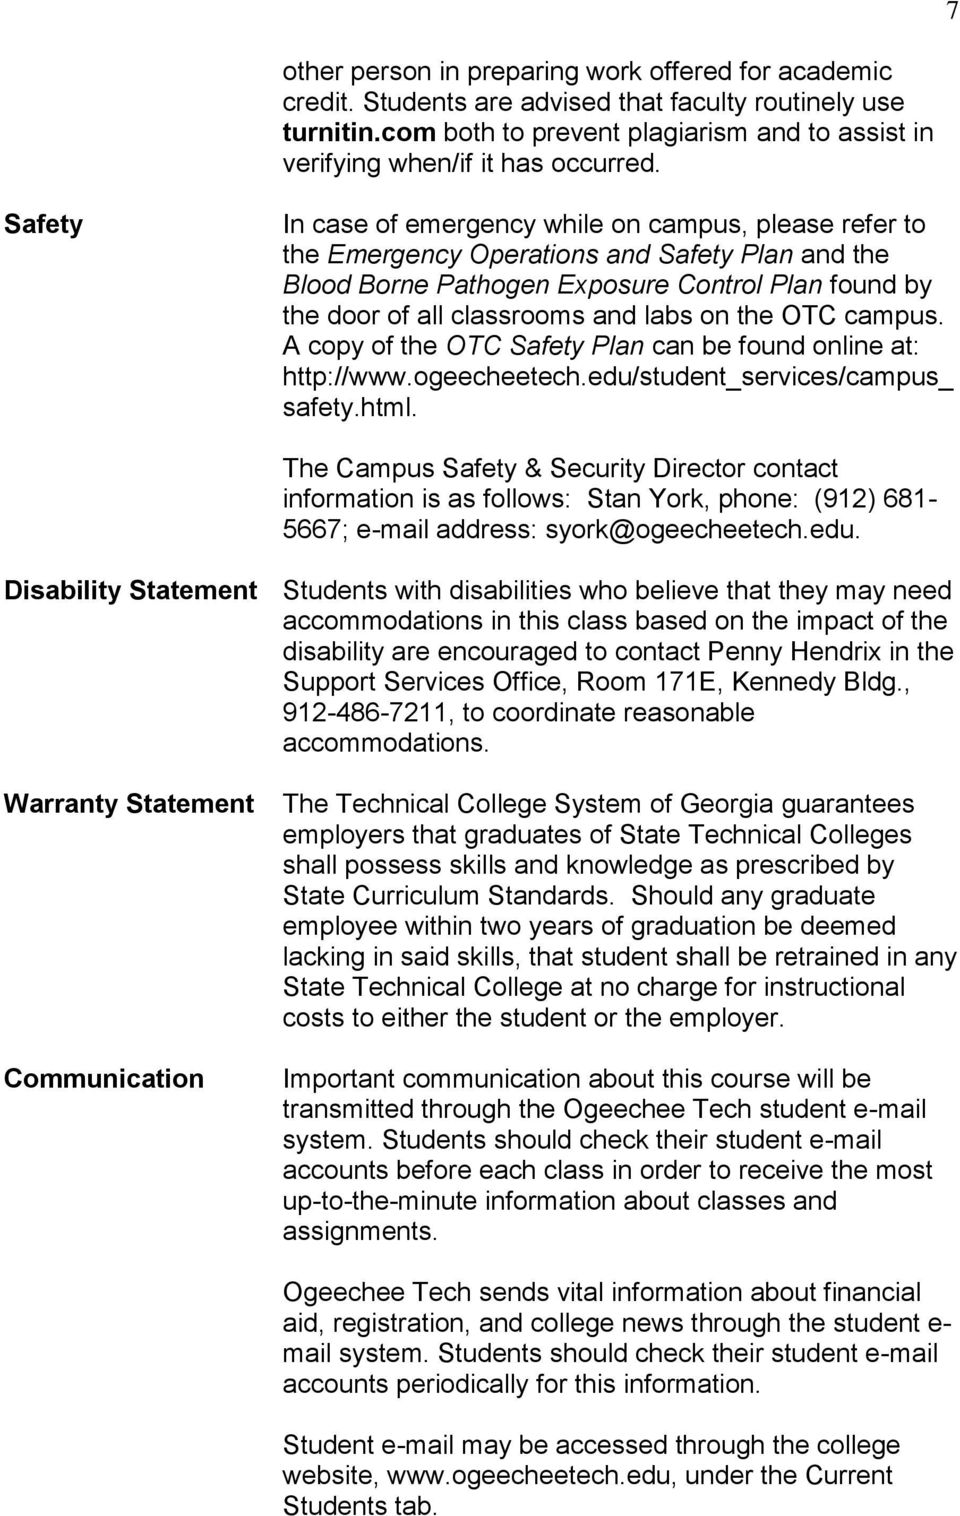 Safety In case of emergency while on campus, please refer to the Emergency Operations and Safety Plan and the Blood Borne Pathogen Exposure Control Plan found by the door of all classrooms and labs